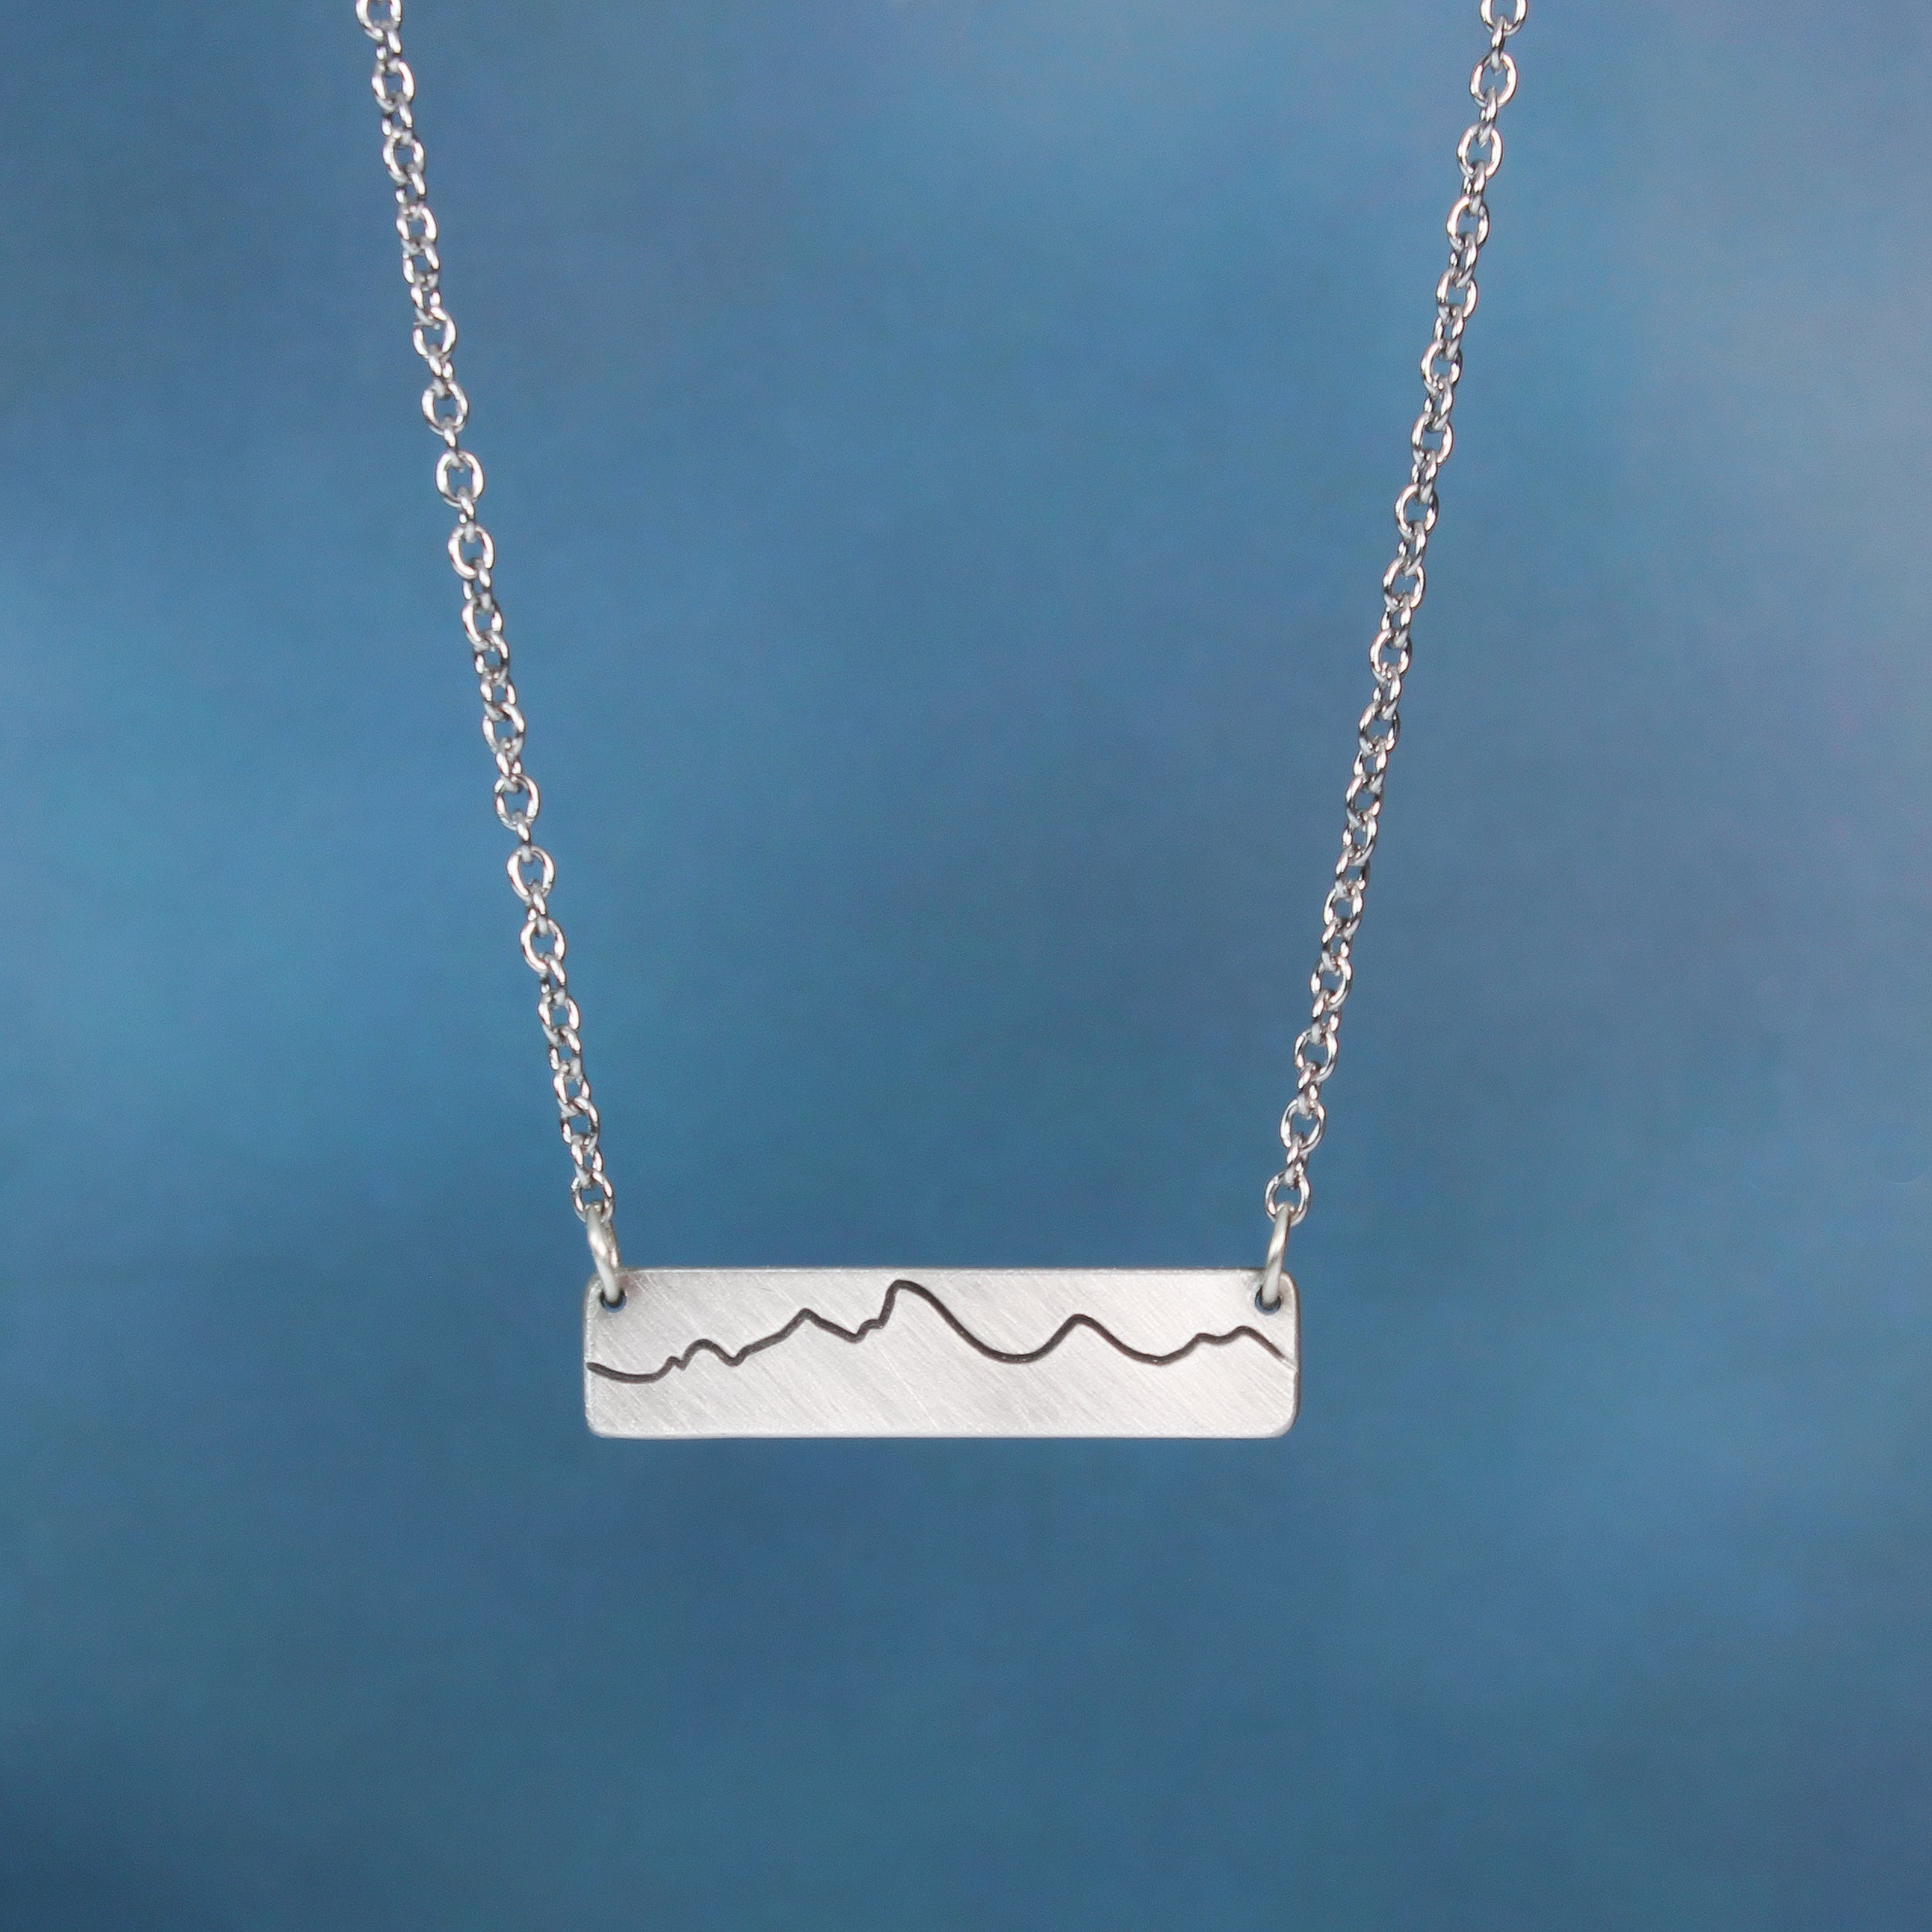 Mountains Silver Necklace - Nature Ridge-line Jewelry – Lil Pepper Jewelry